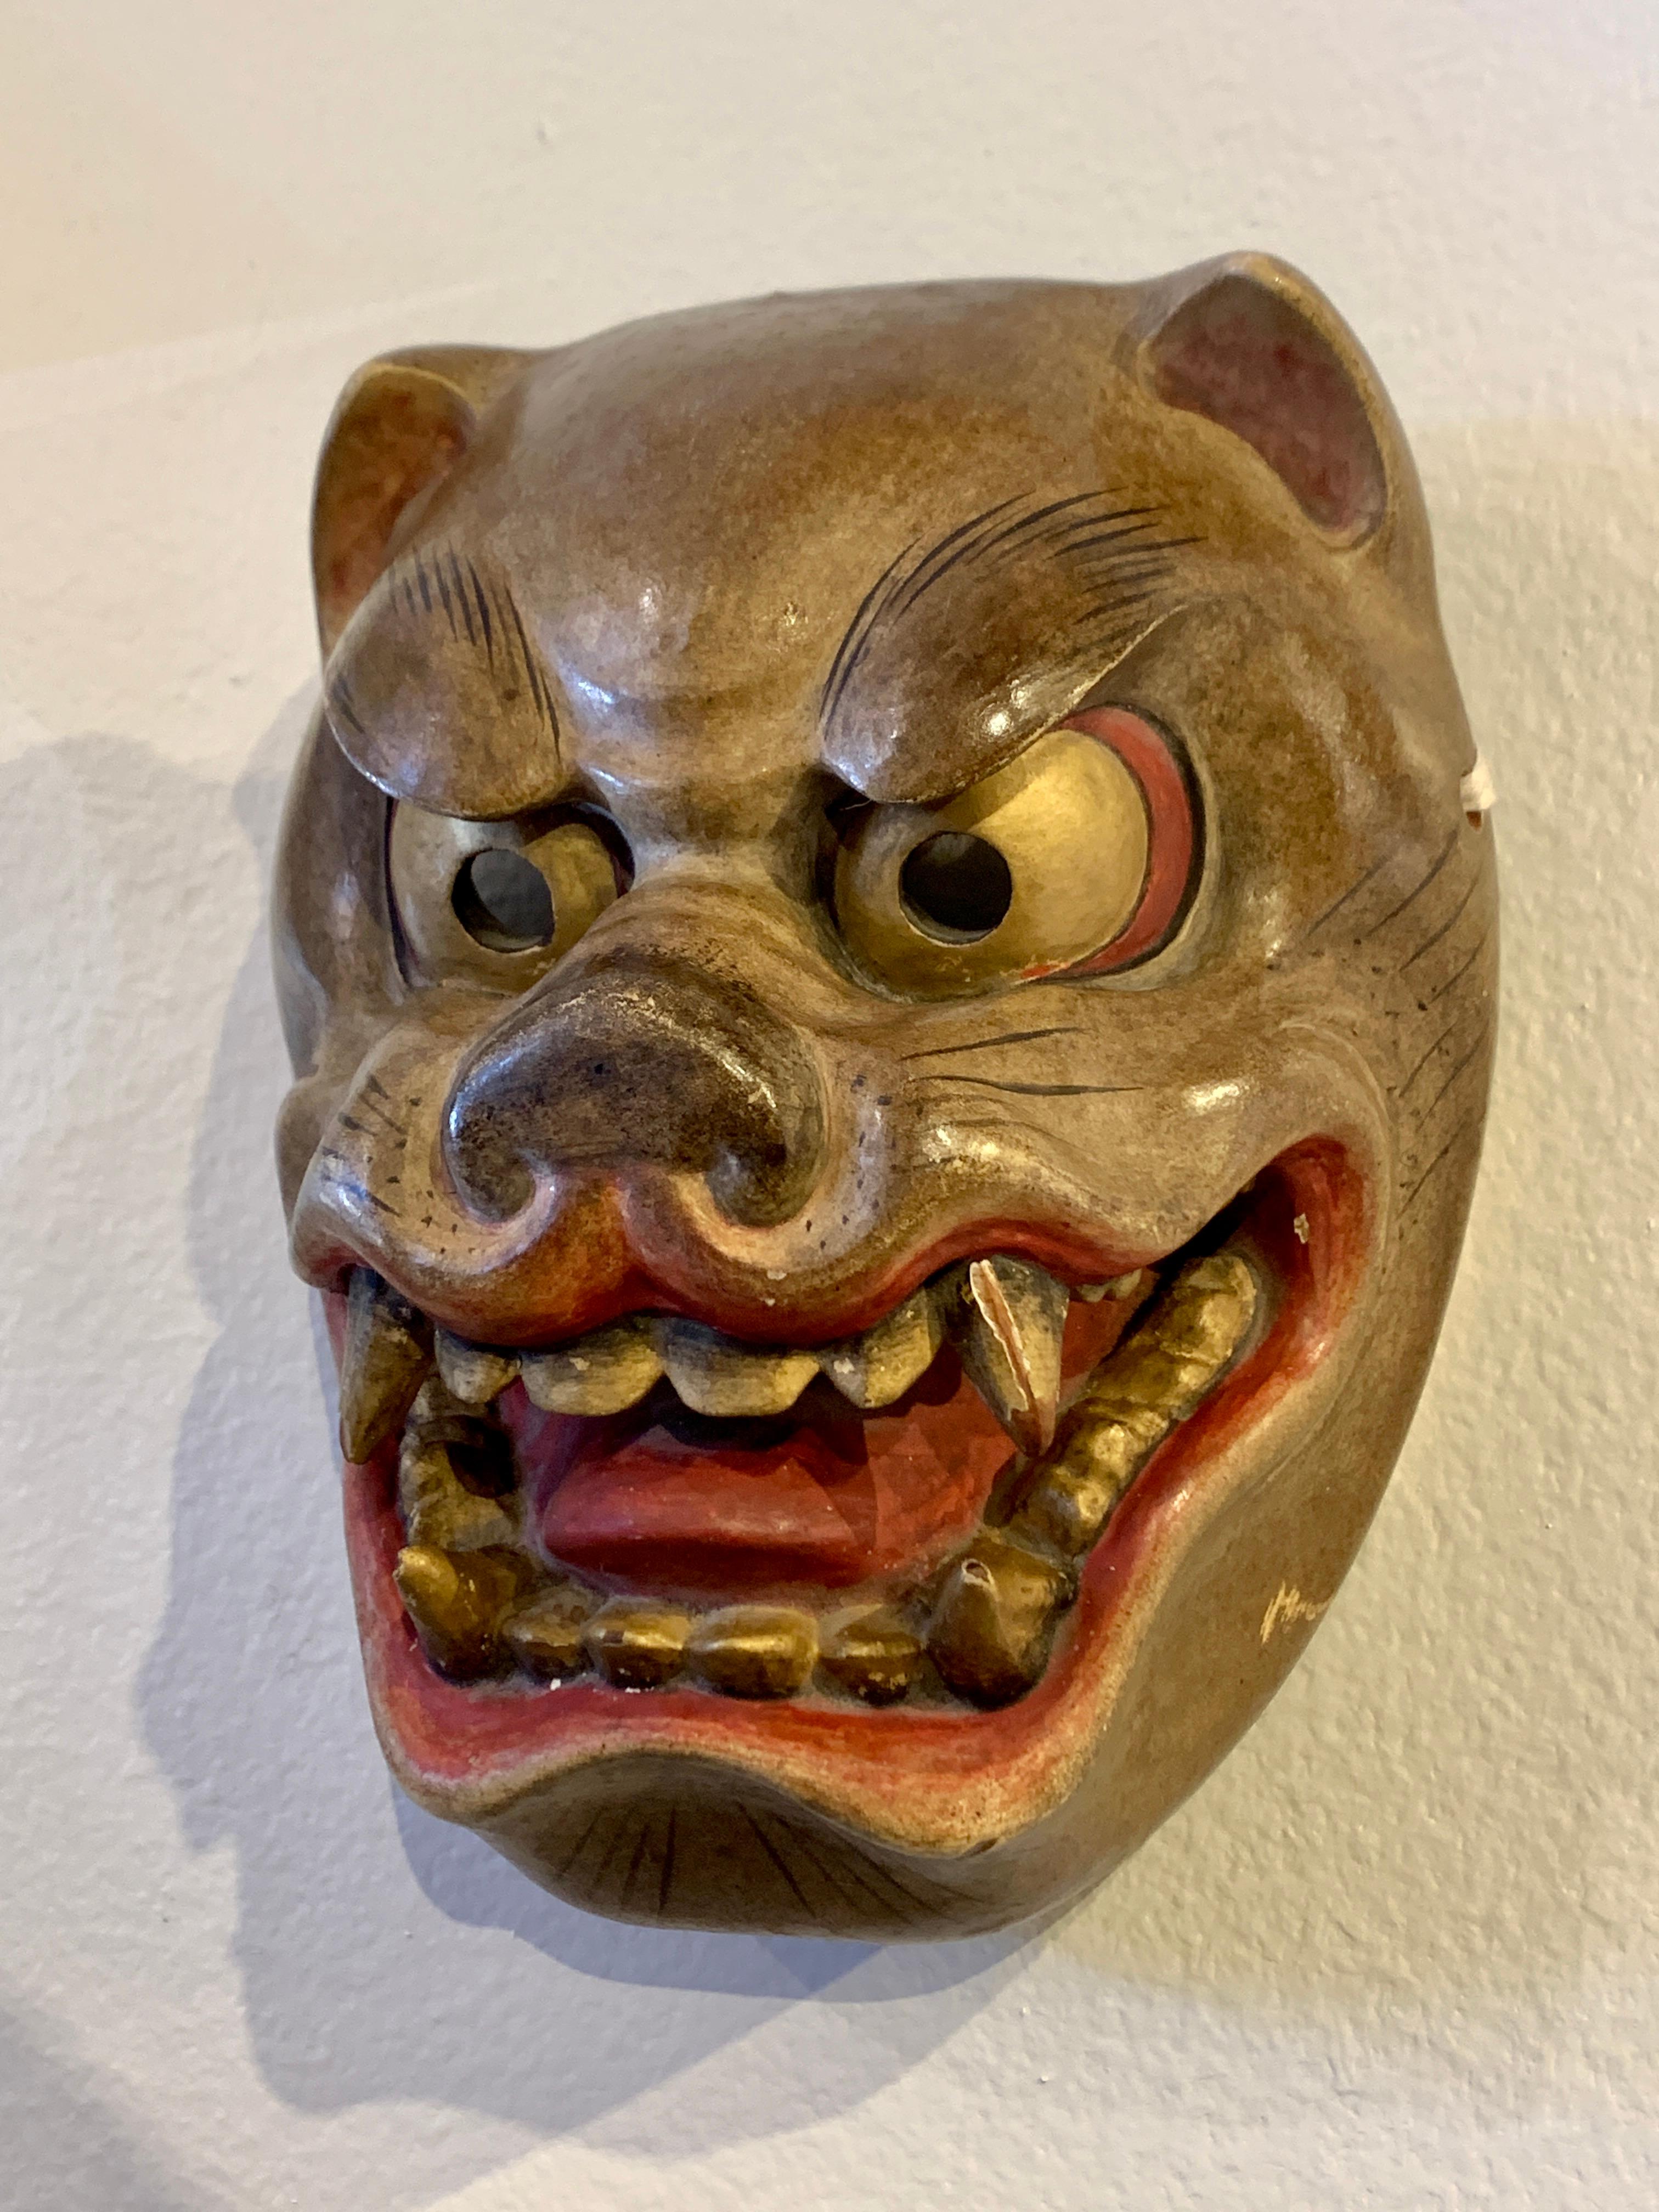 A fantastic and expressive Japanese carved wood mask of a tiger, made for kyogen theater performances, Showa Era, mid 20th century, Japan.

The tiger mask has been carved with wild and dramatic expressions. The tiger's mouth is open, fangs bared